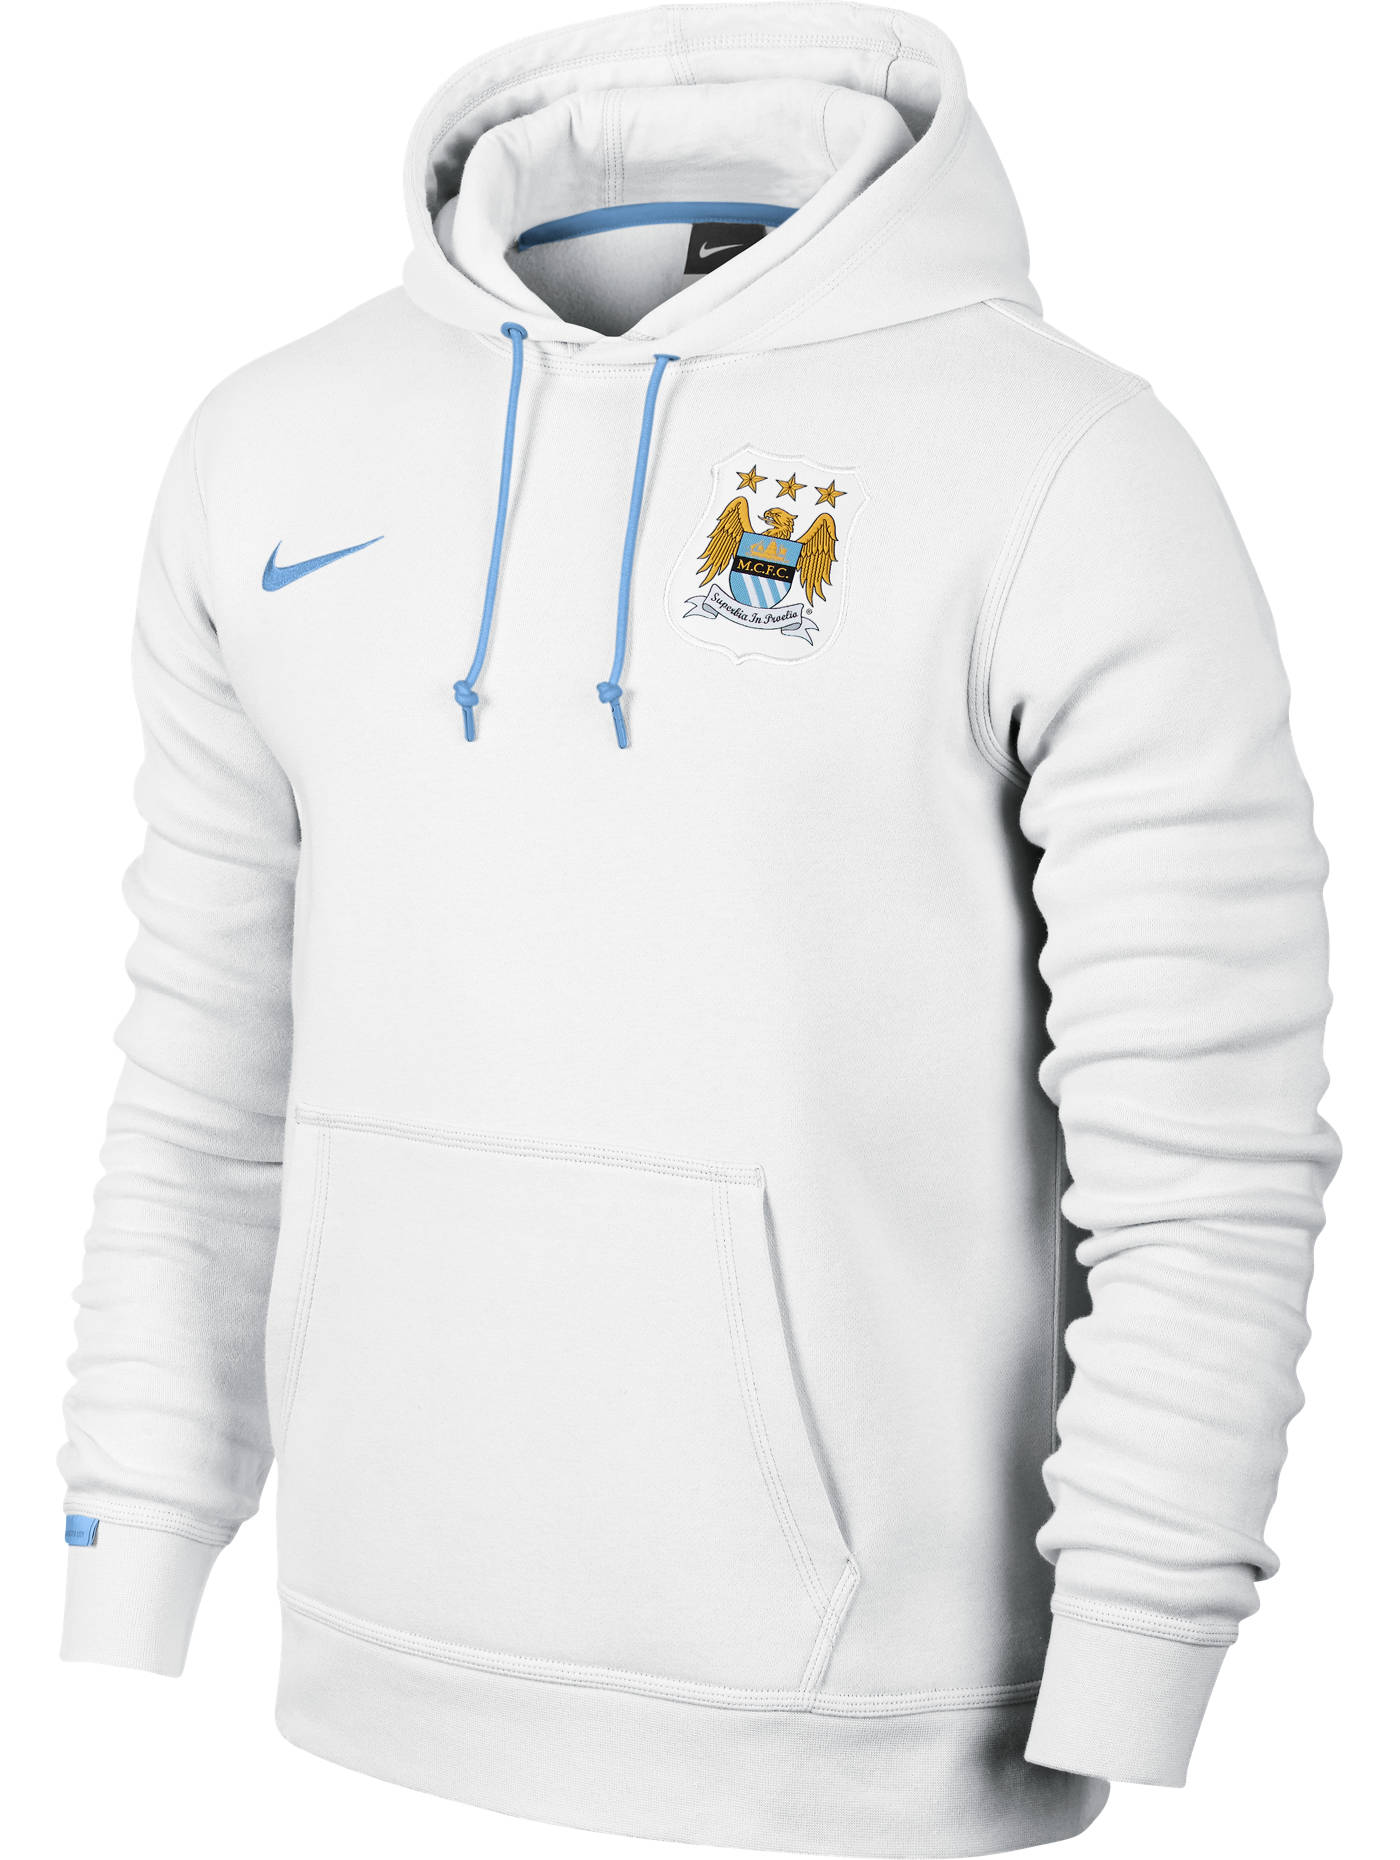 Core Manchester City Nike Felpa Cappuccio Hoodie 2015 16 with pockets ...